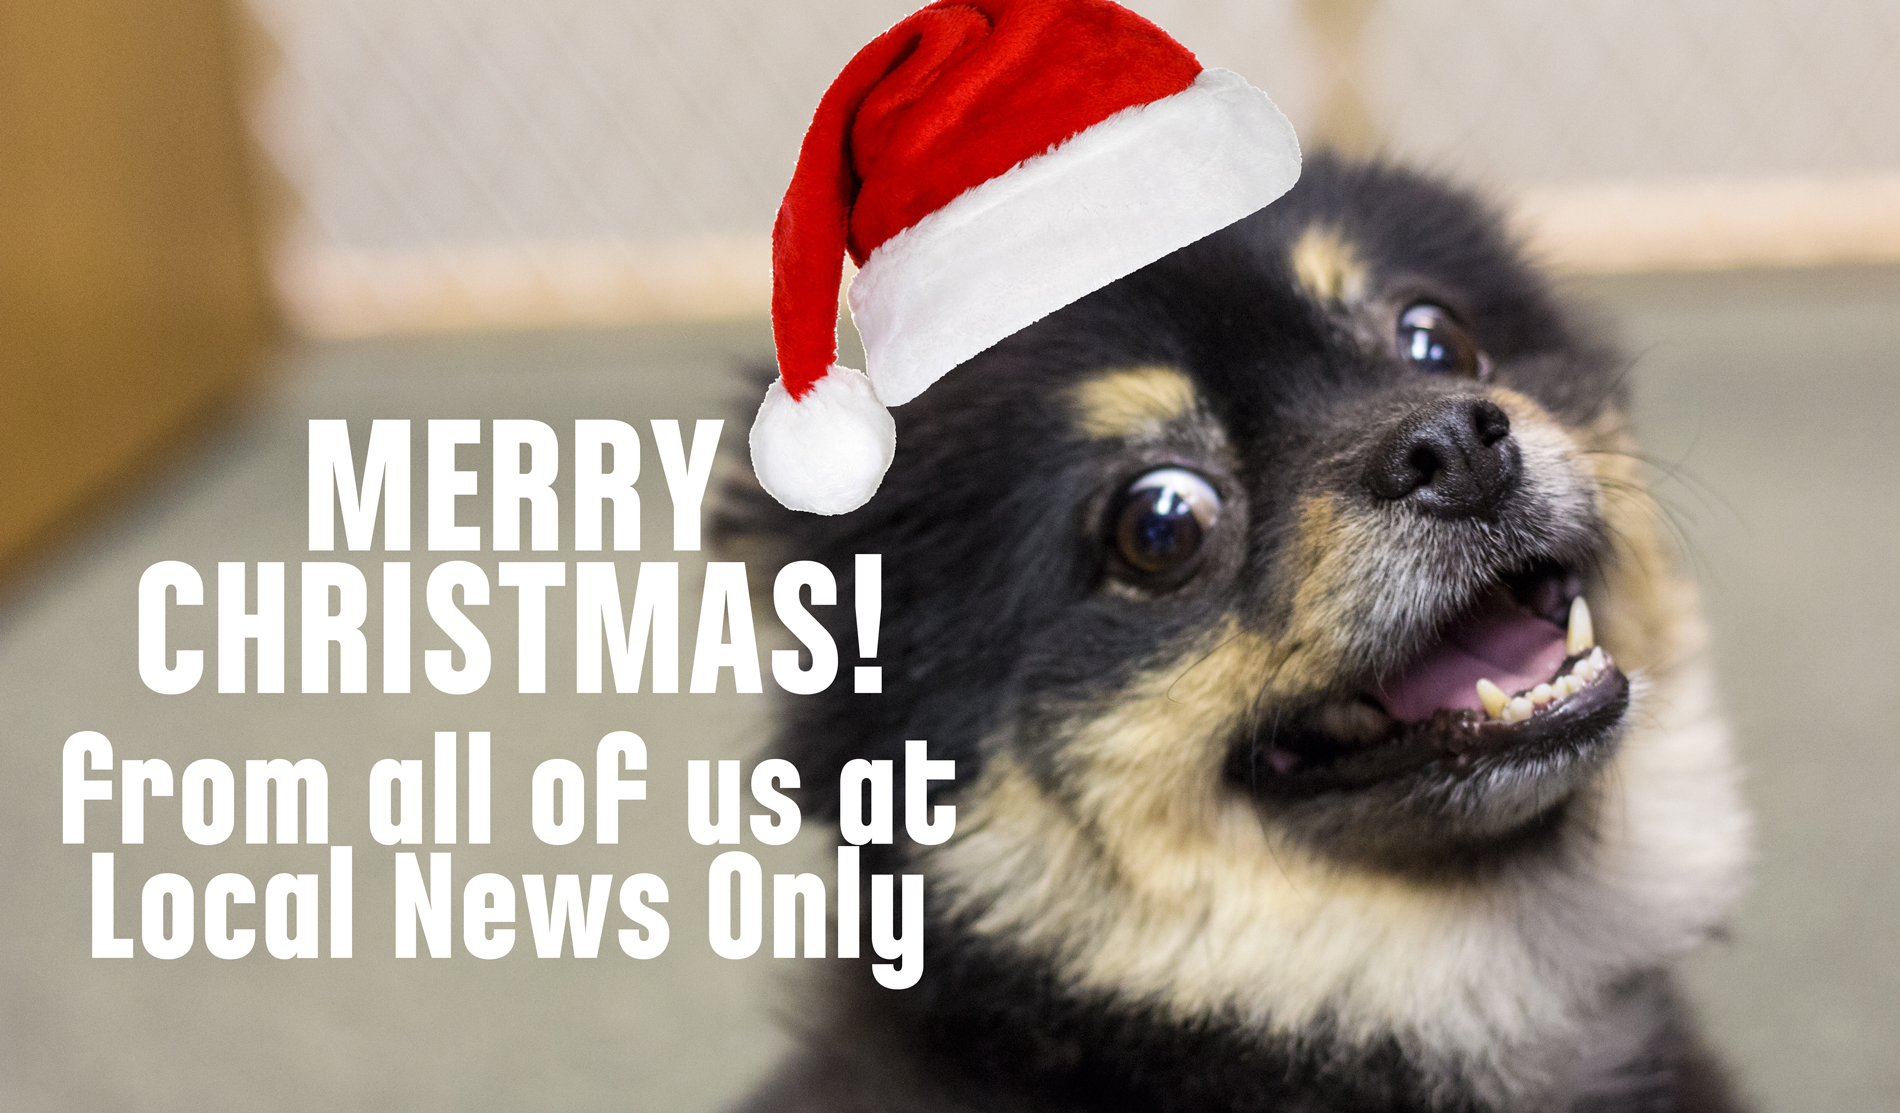 Merry Christmas from Local News Only!